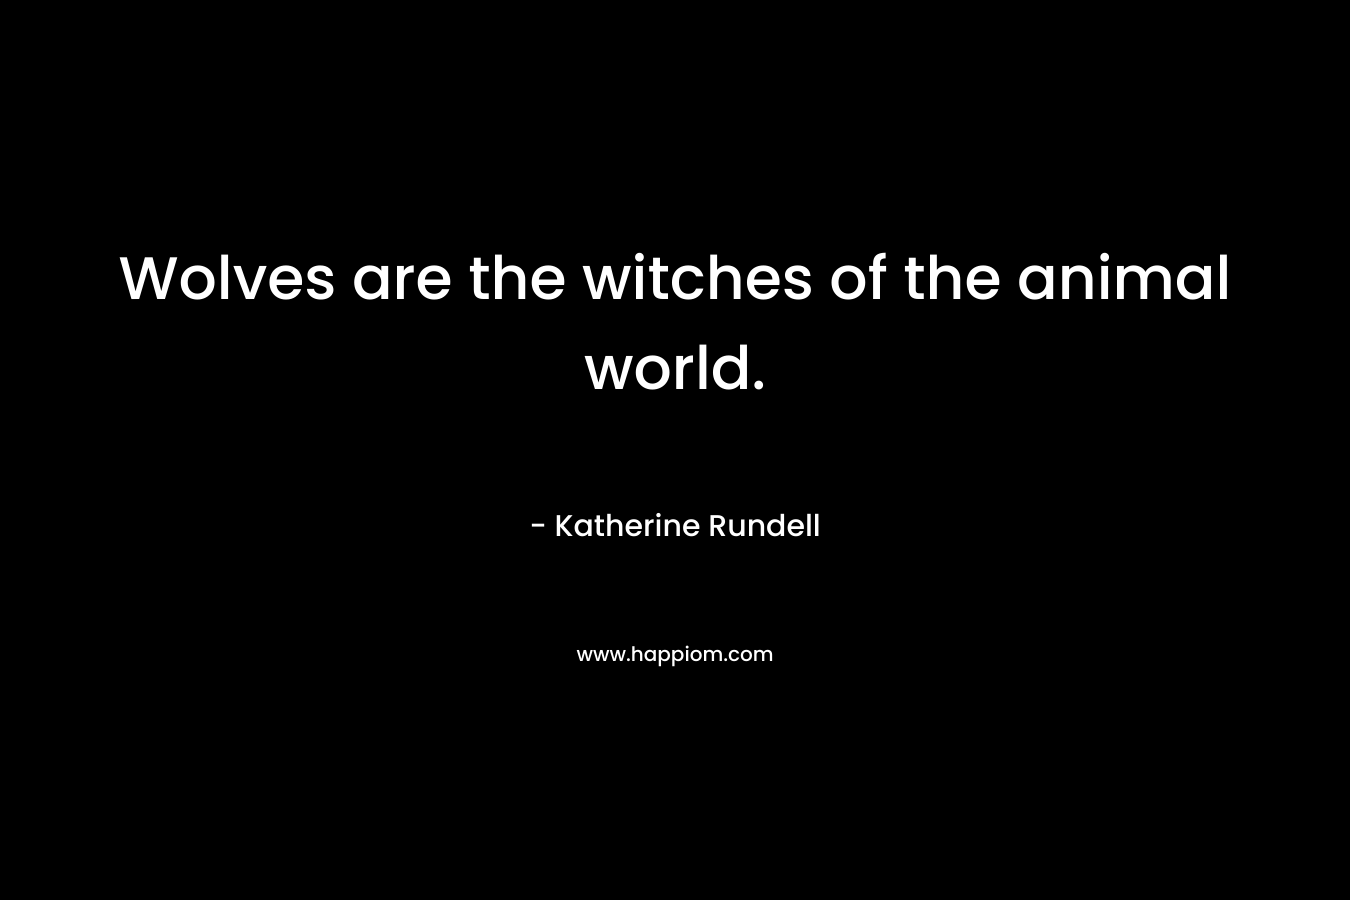 Wolves are the witches of the animal world. – Katherine Rundell